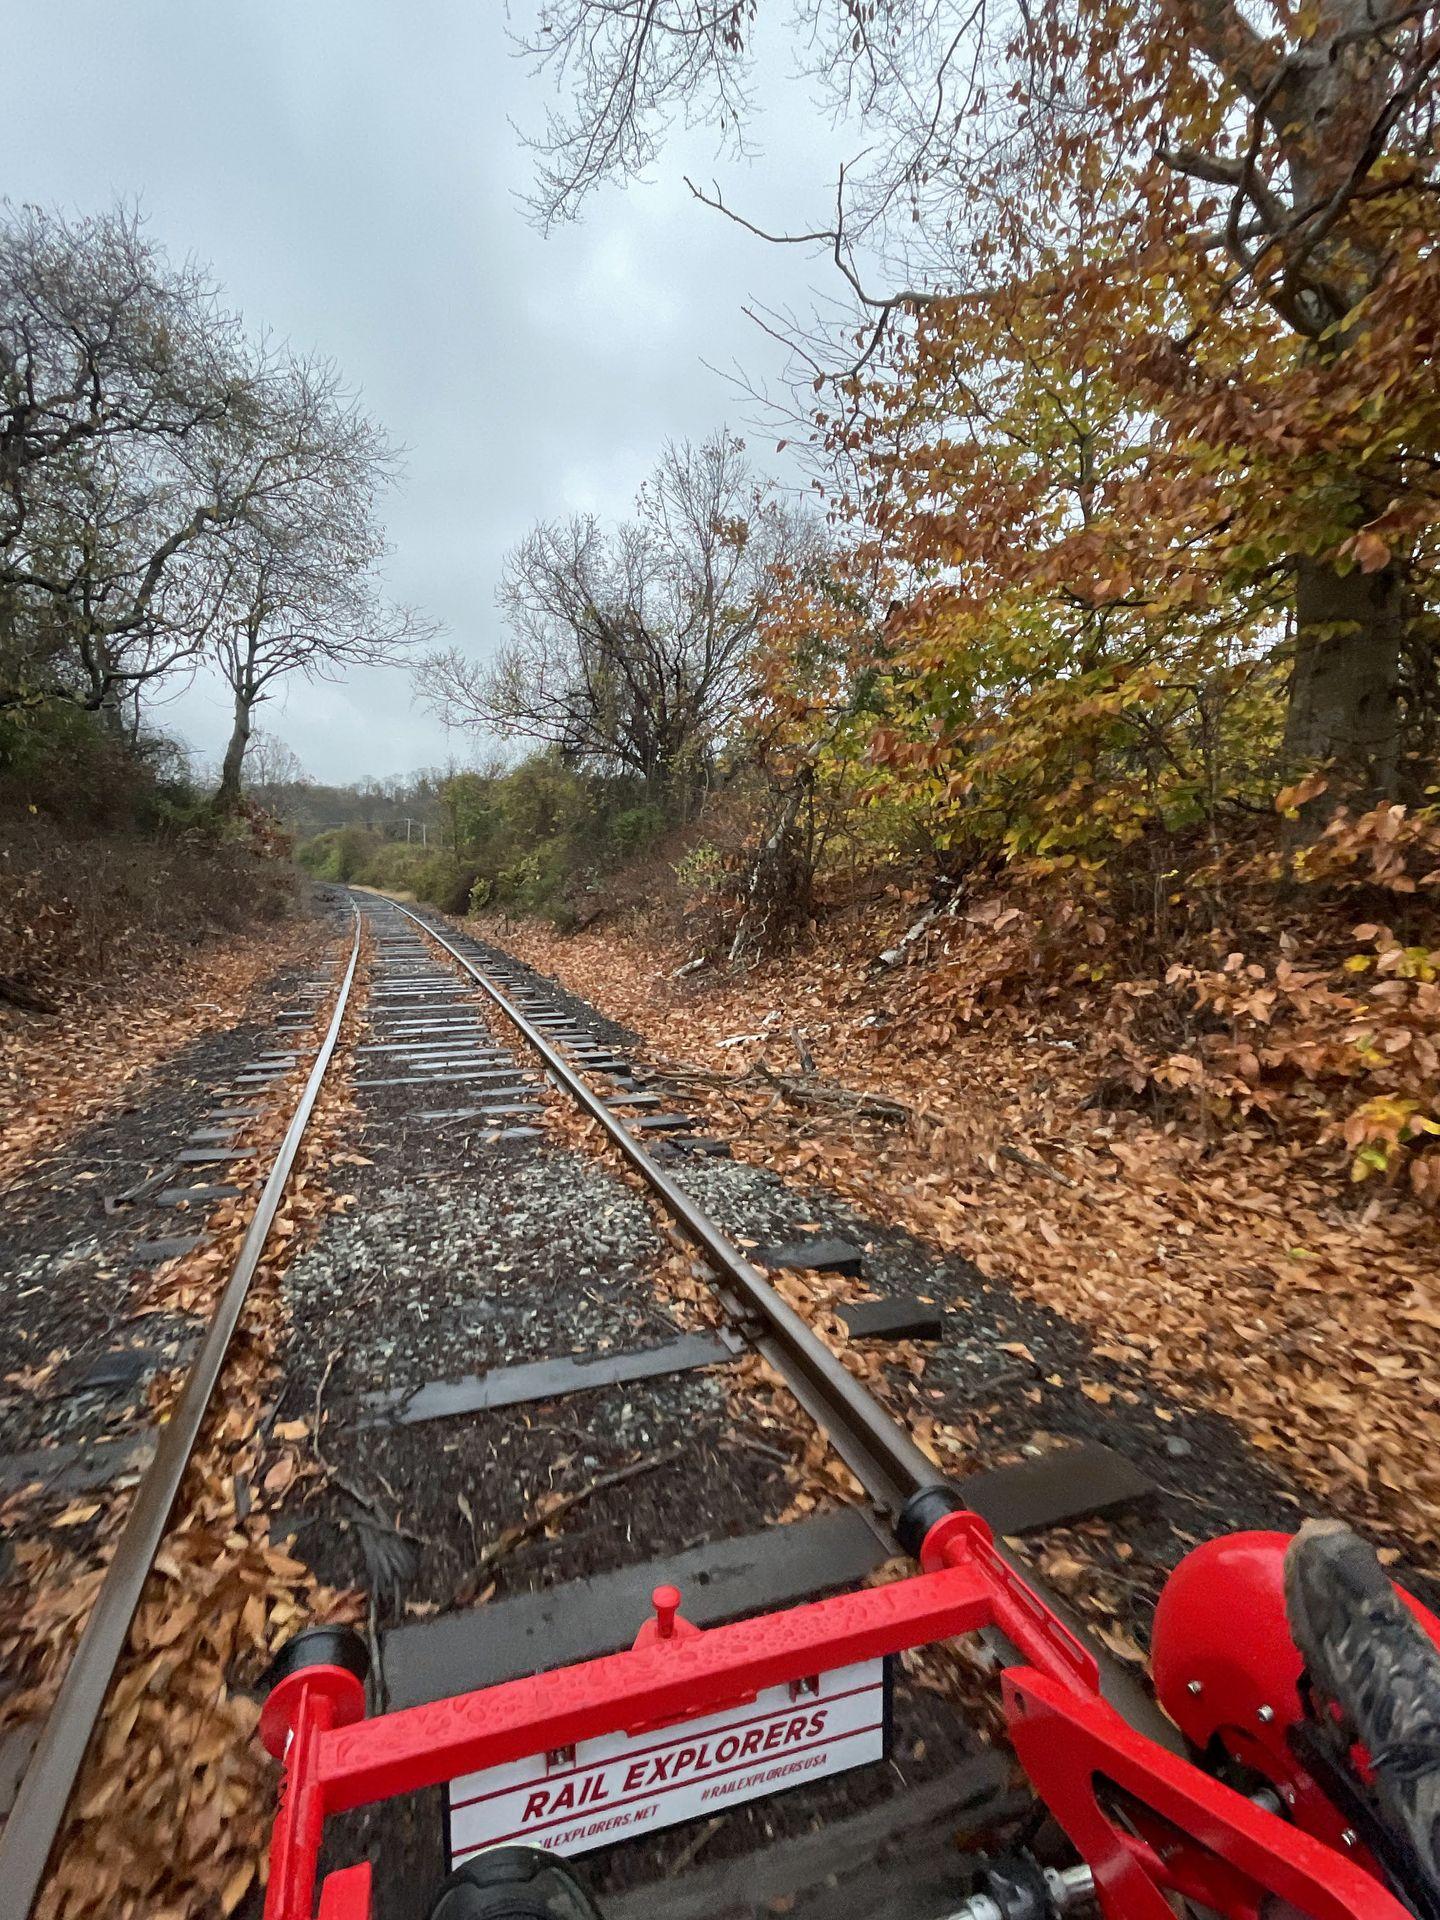 A view of the front of the rail explorers bike. Several fallen leaves are surrounding the tracks.